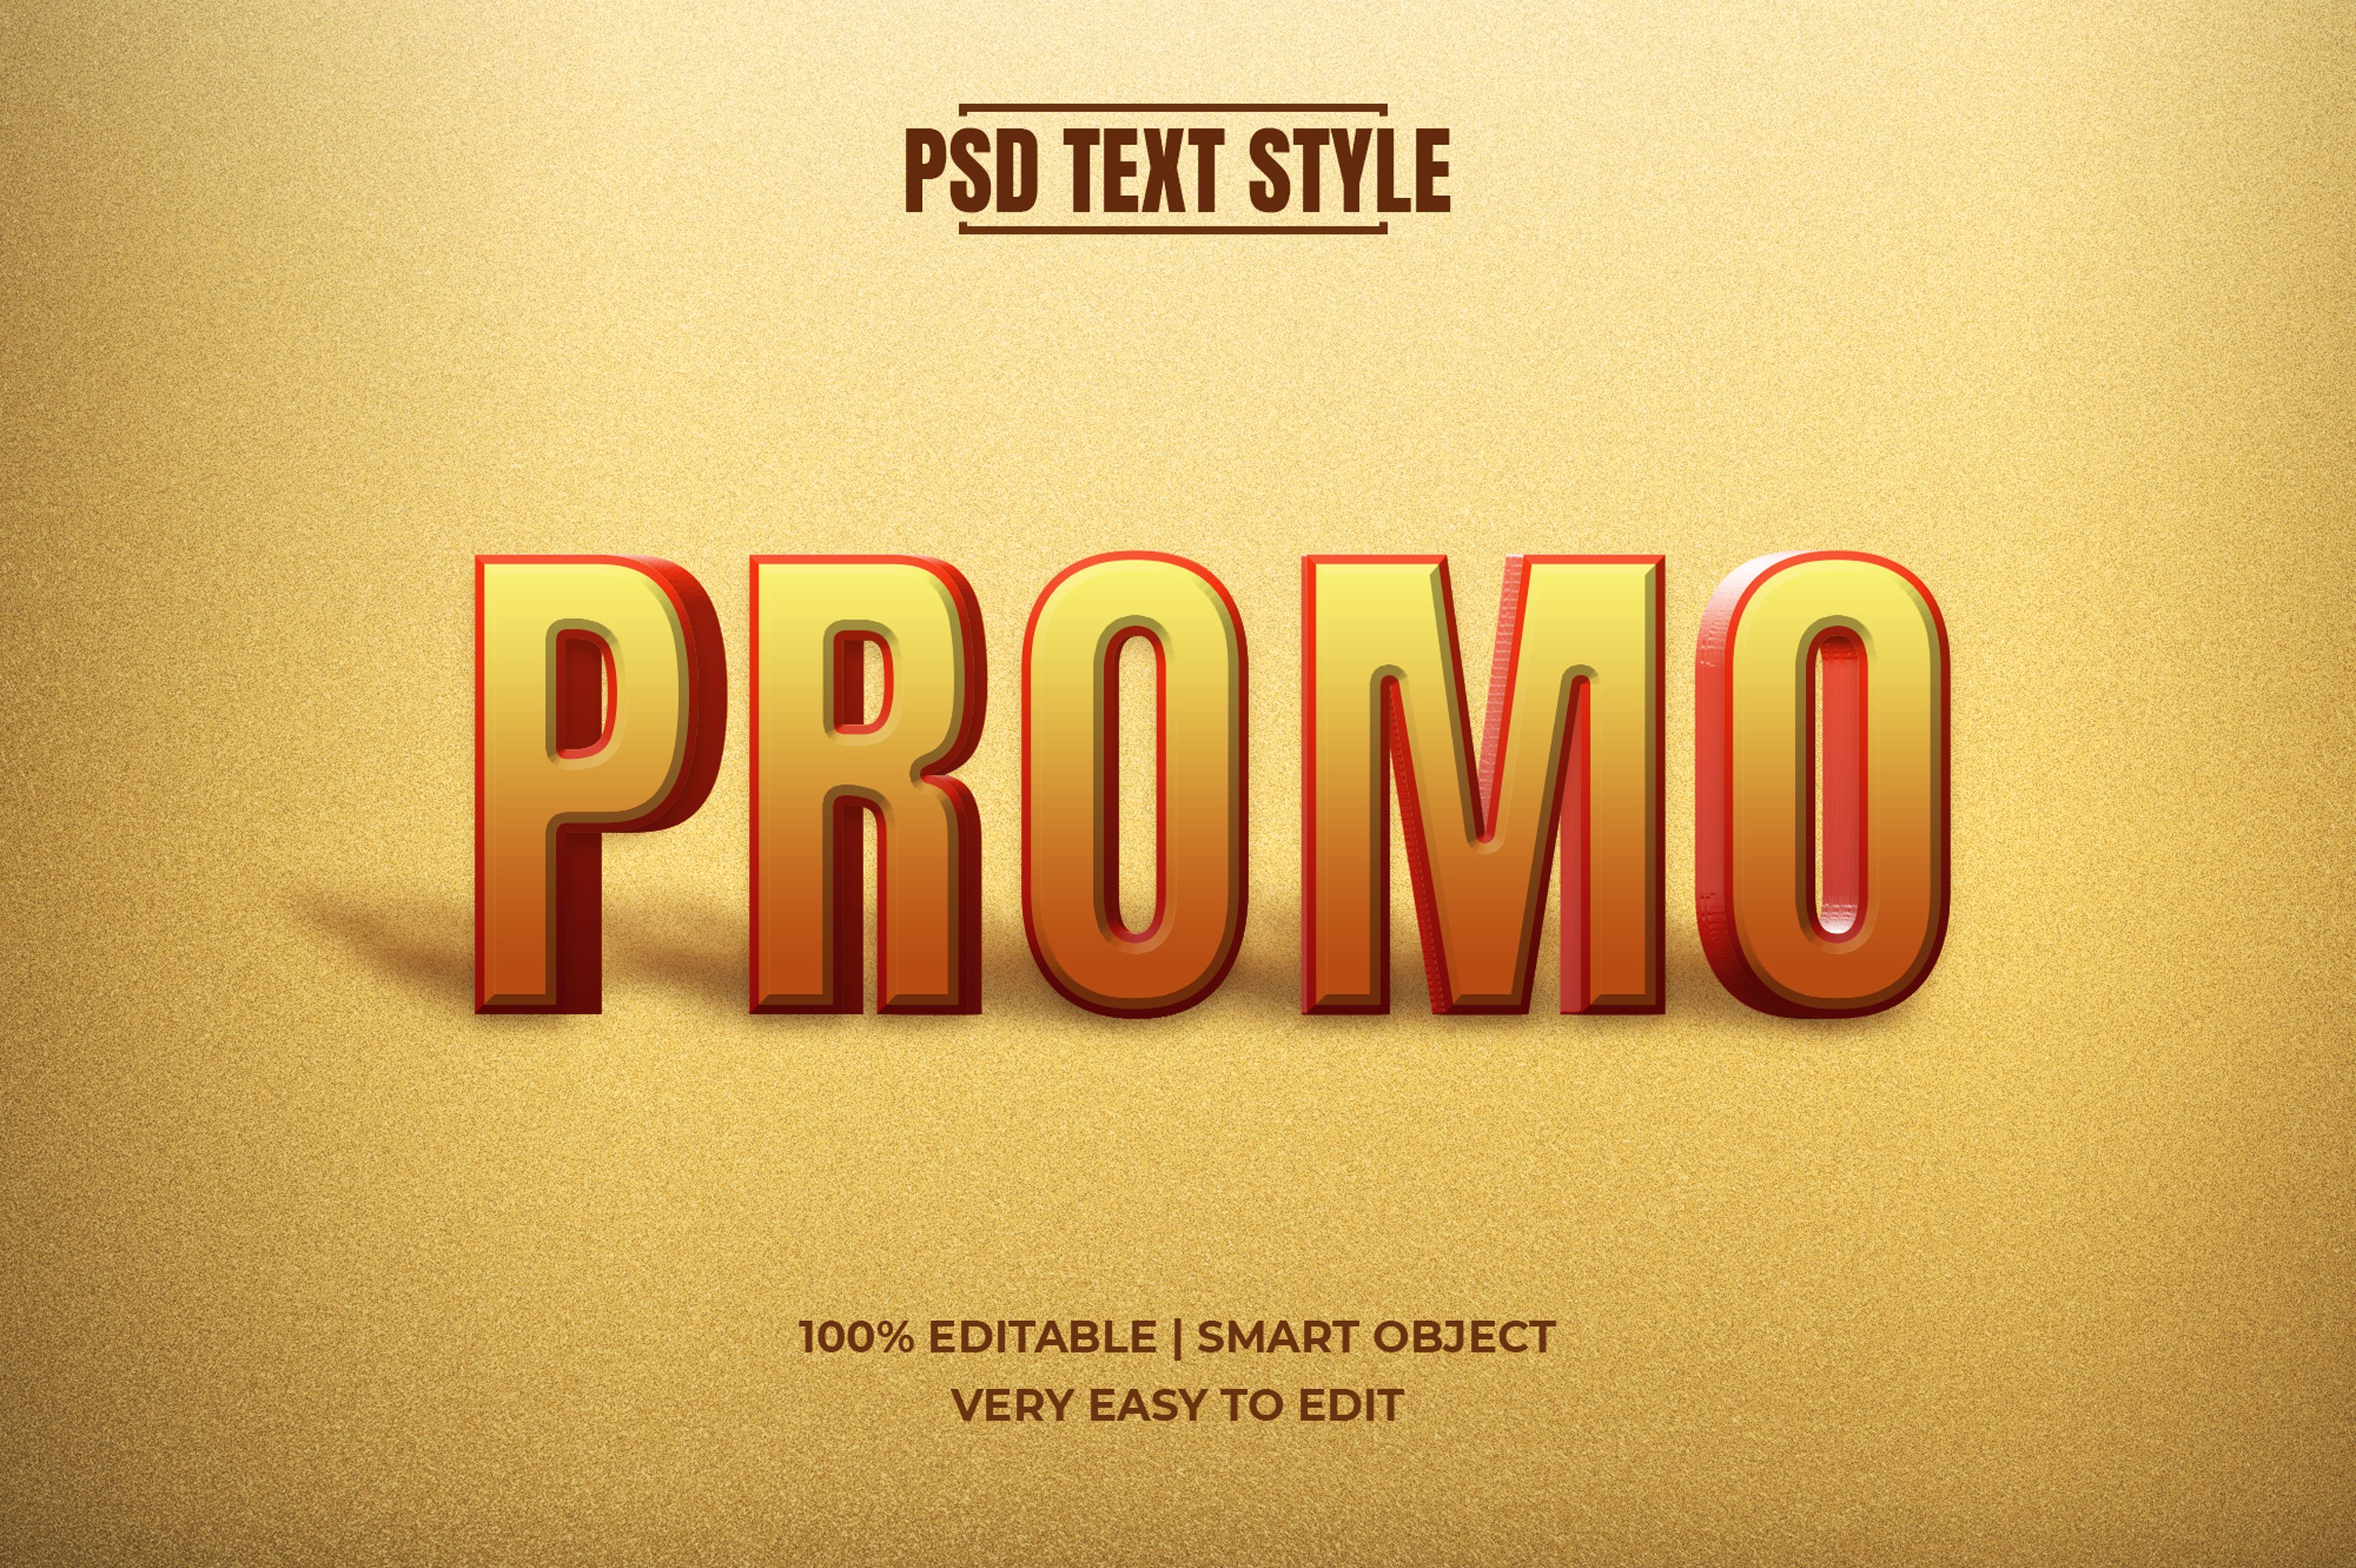 Promo Gold 3D Text Effect Mockup PSDcover image.